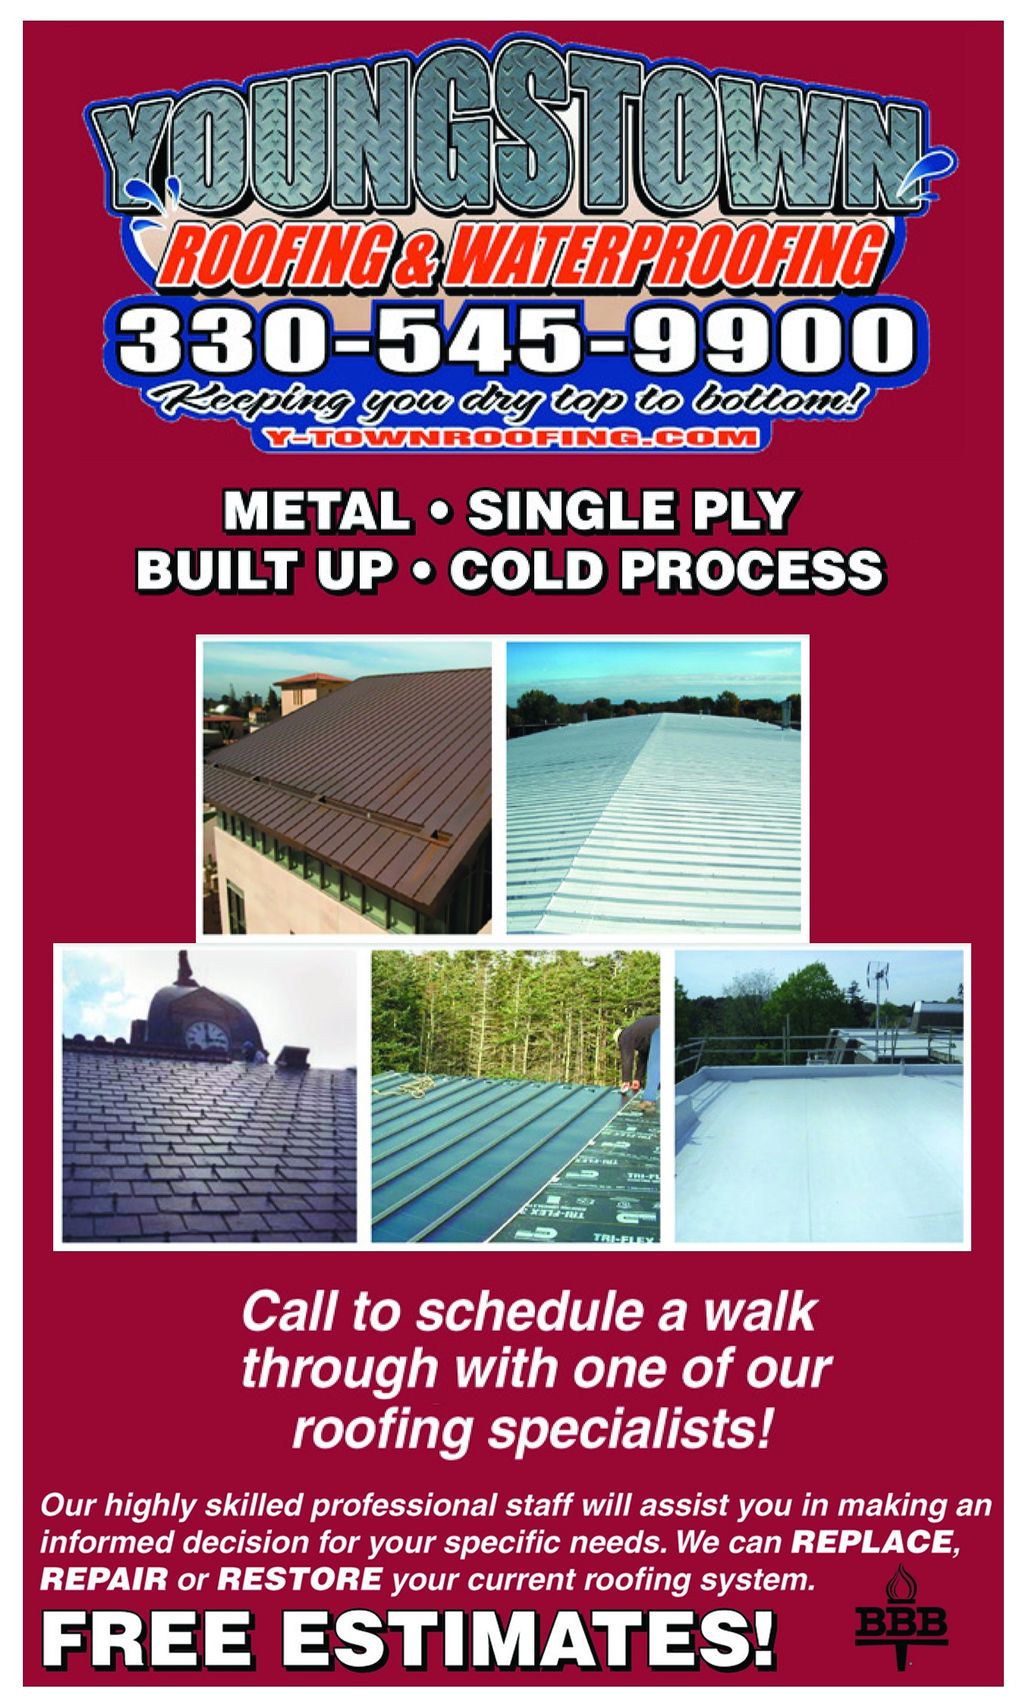 Youngstown Roofing & Waterproofing